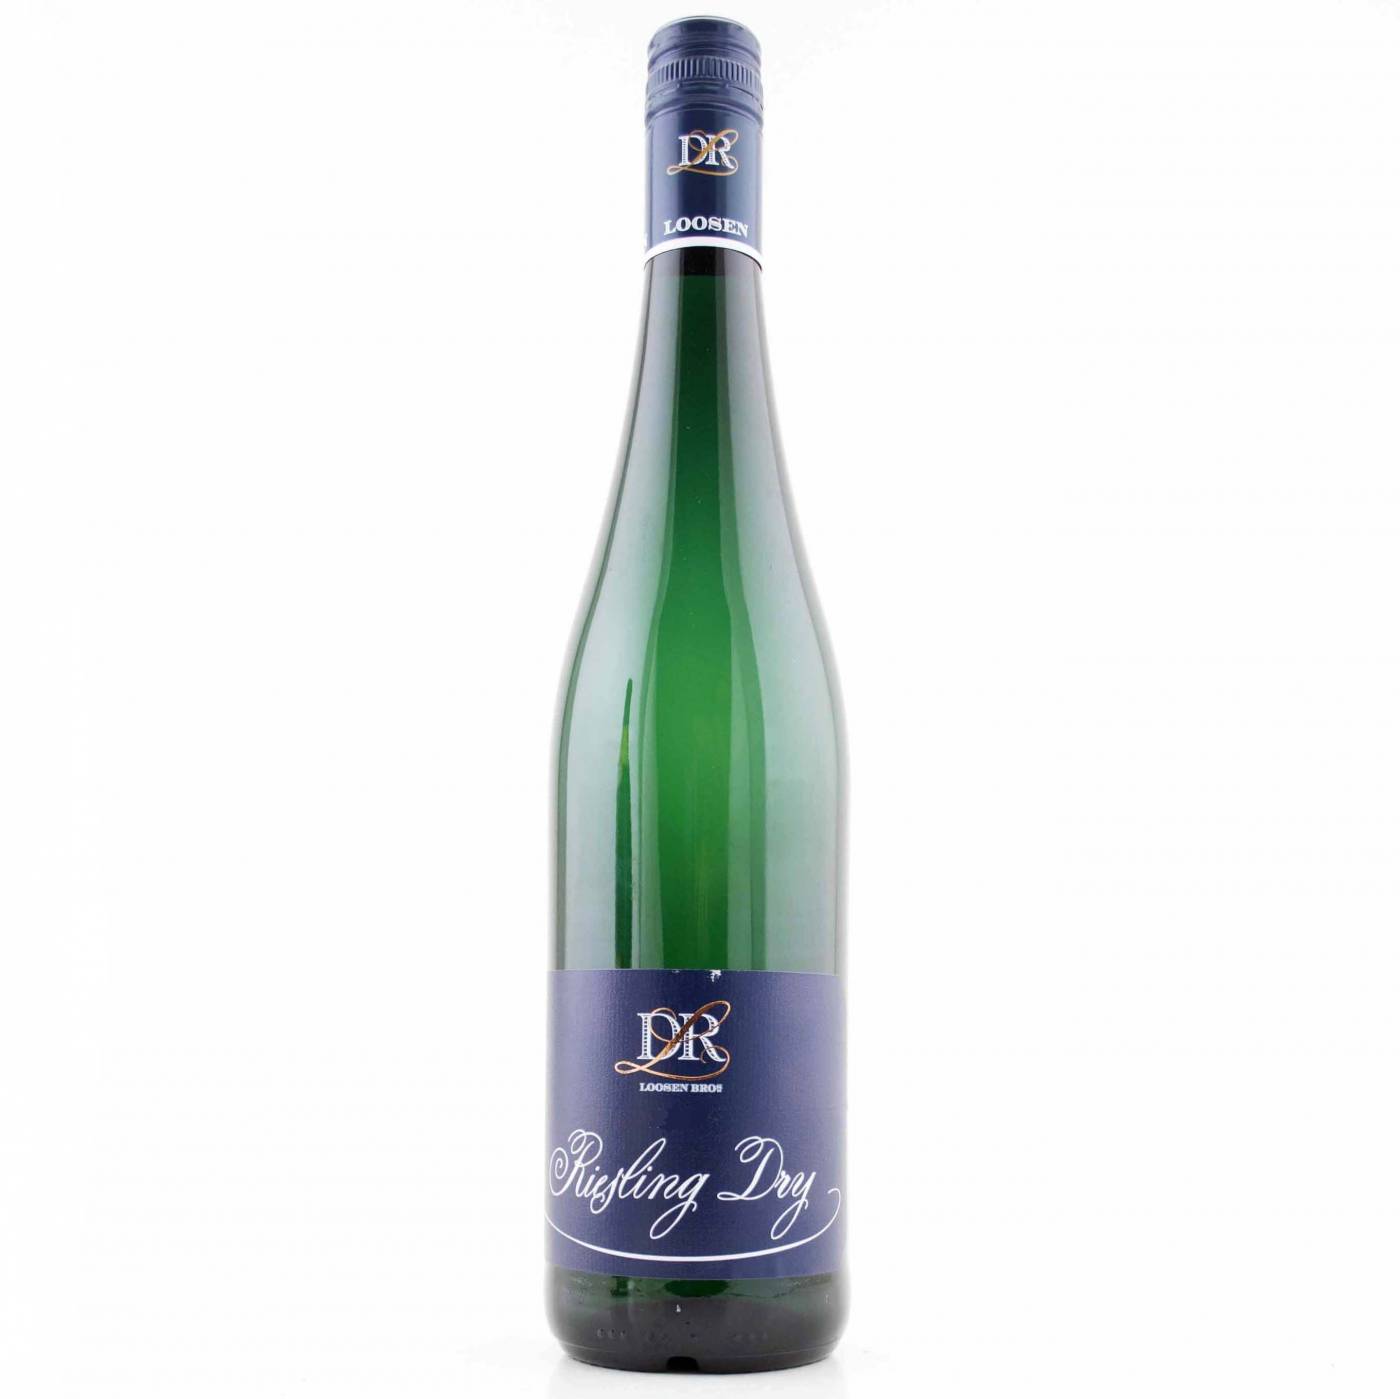 Dr LOOSEN RIESLING DRY ΛΕΥΚΟ 750ml